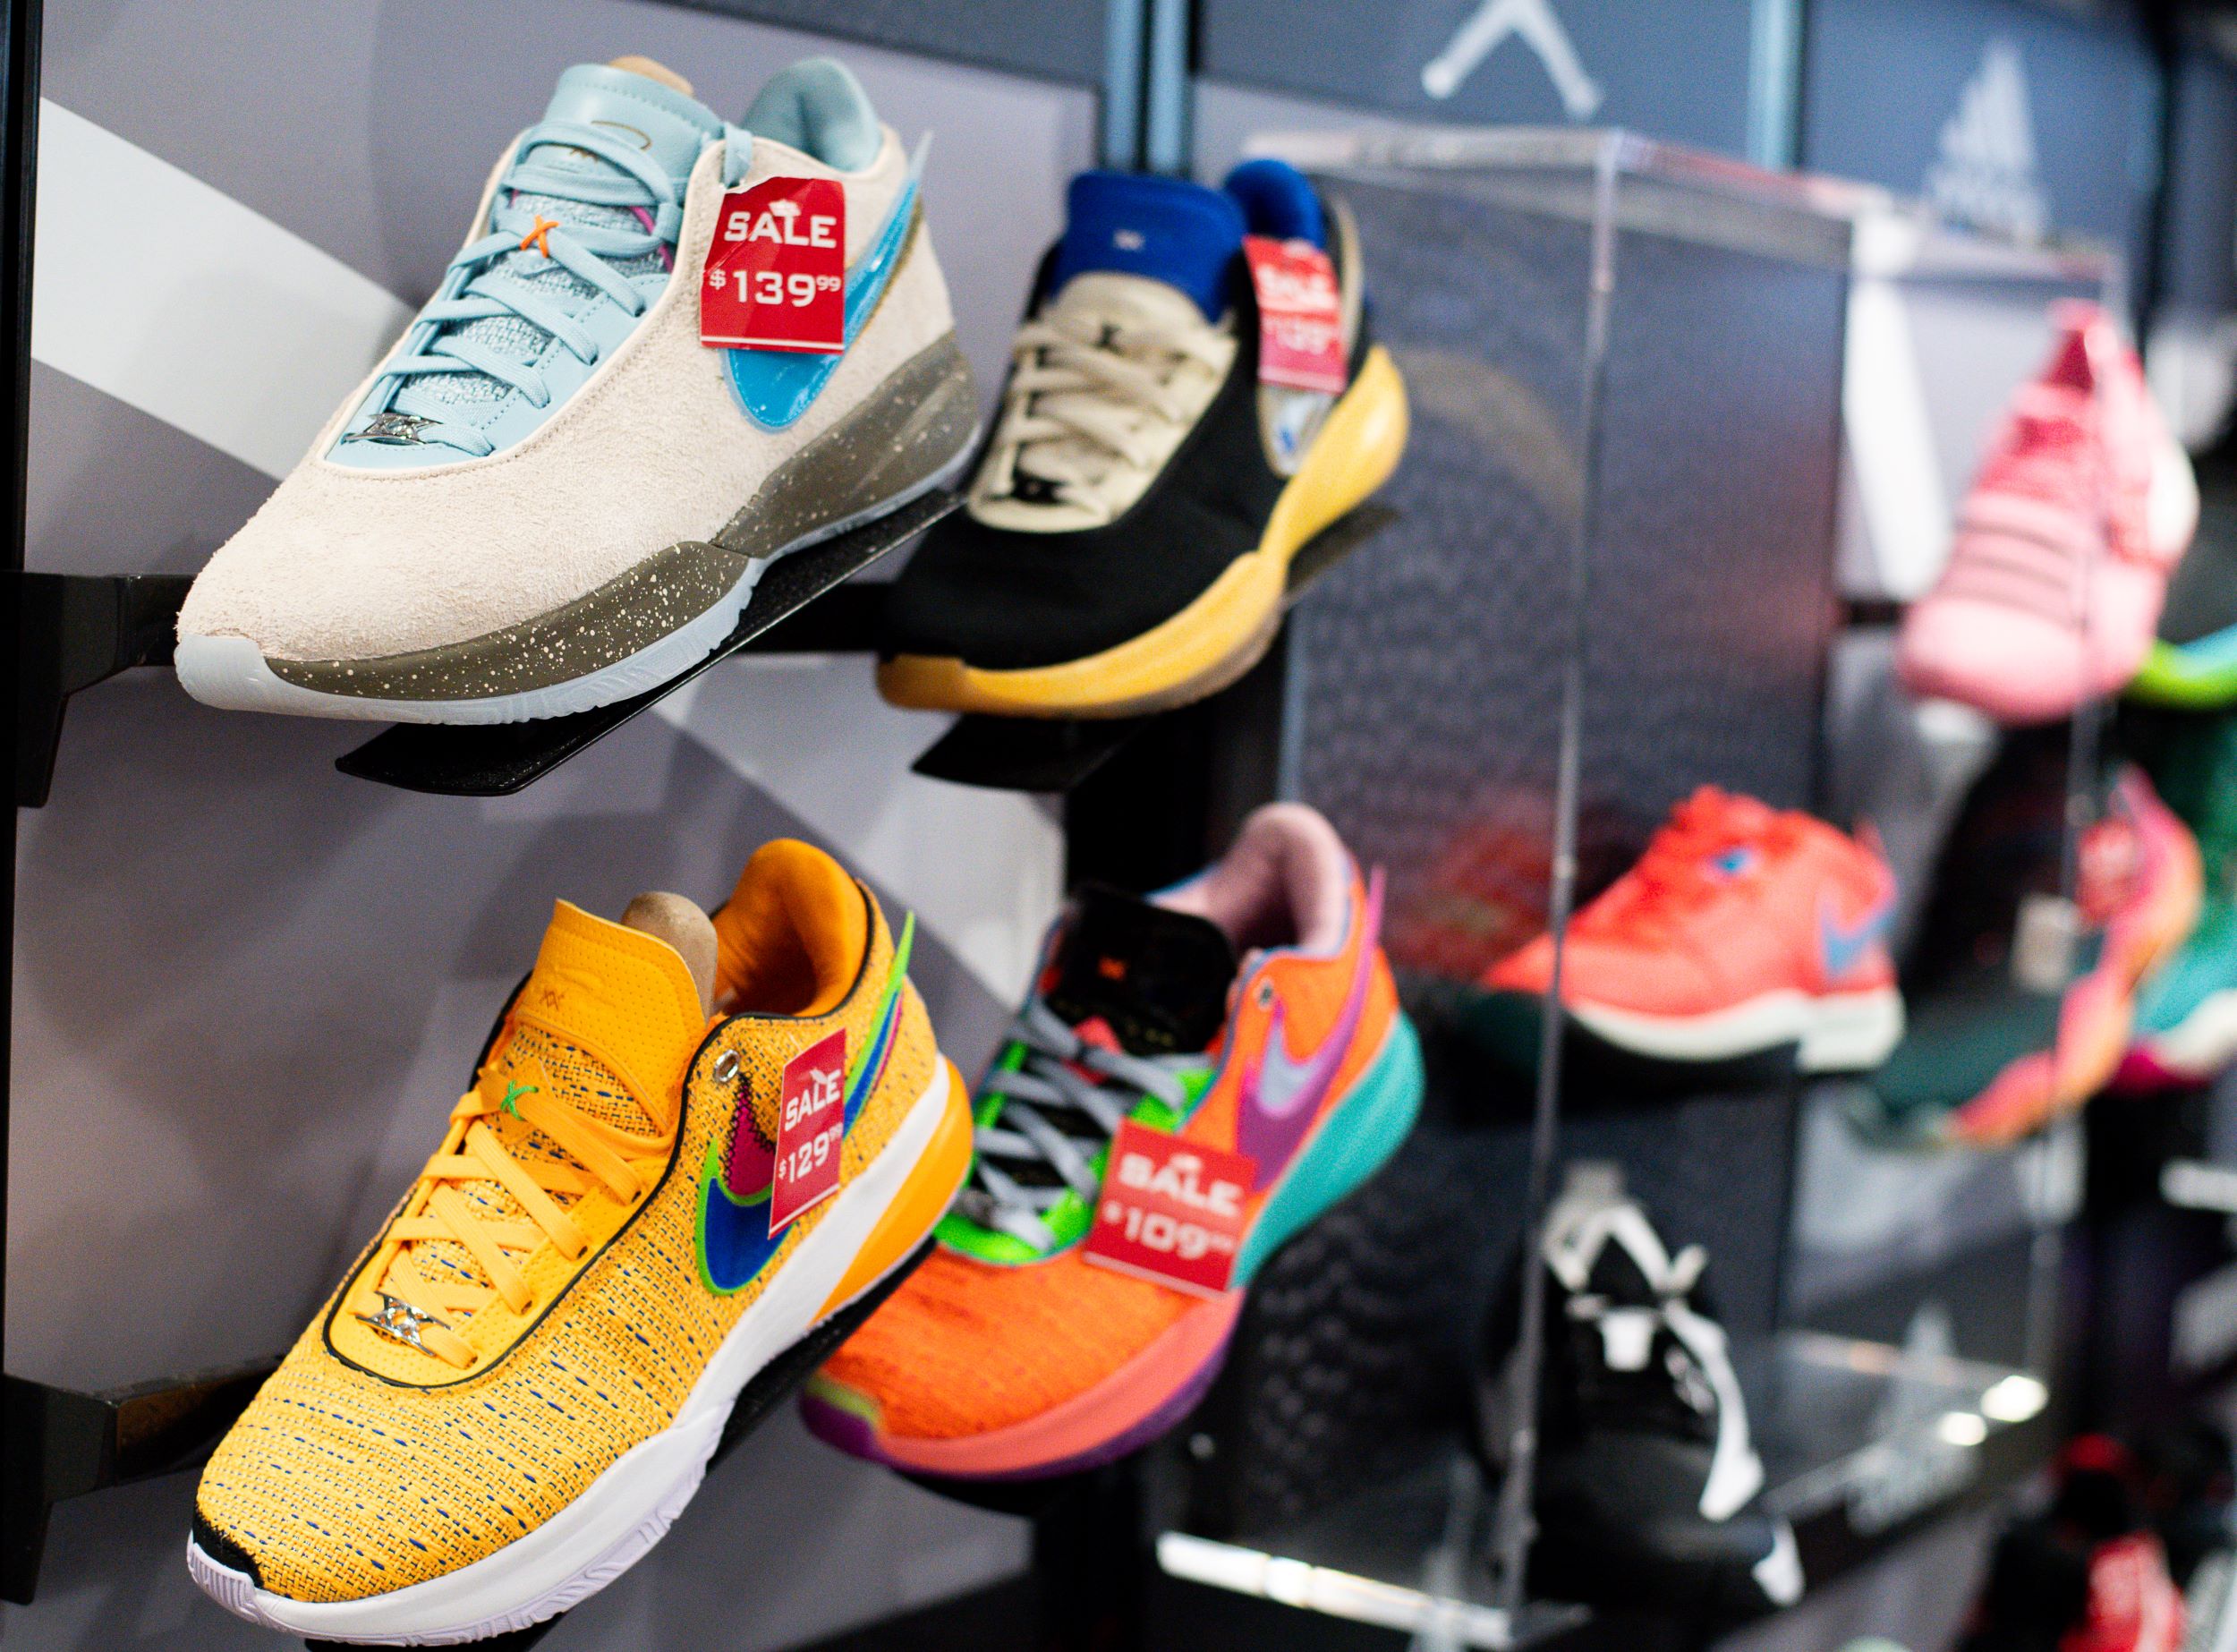 Colorful sneakers on display with sale tags, highlighting a variety of styles and brands on a shoe rack in a store.